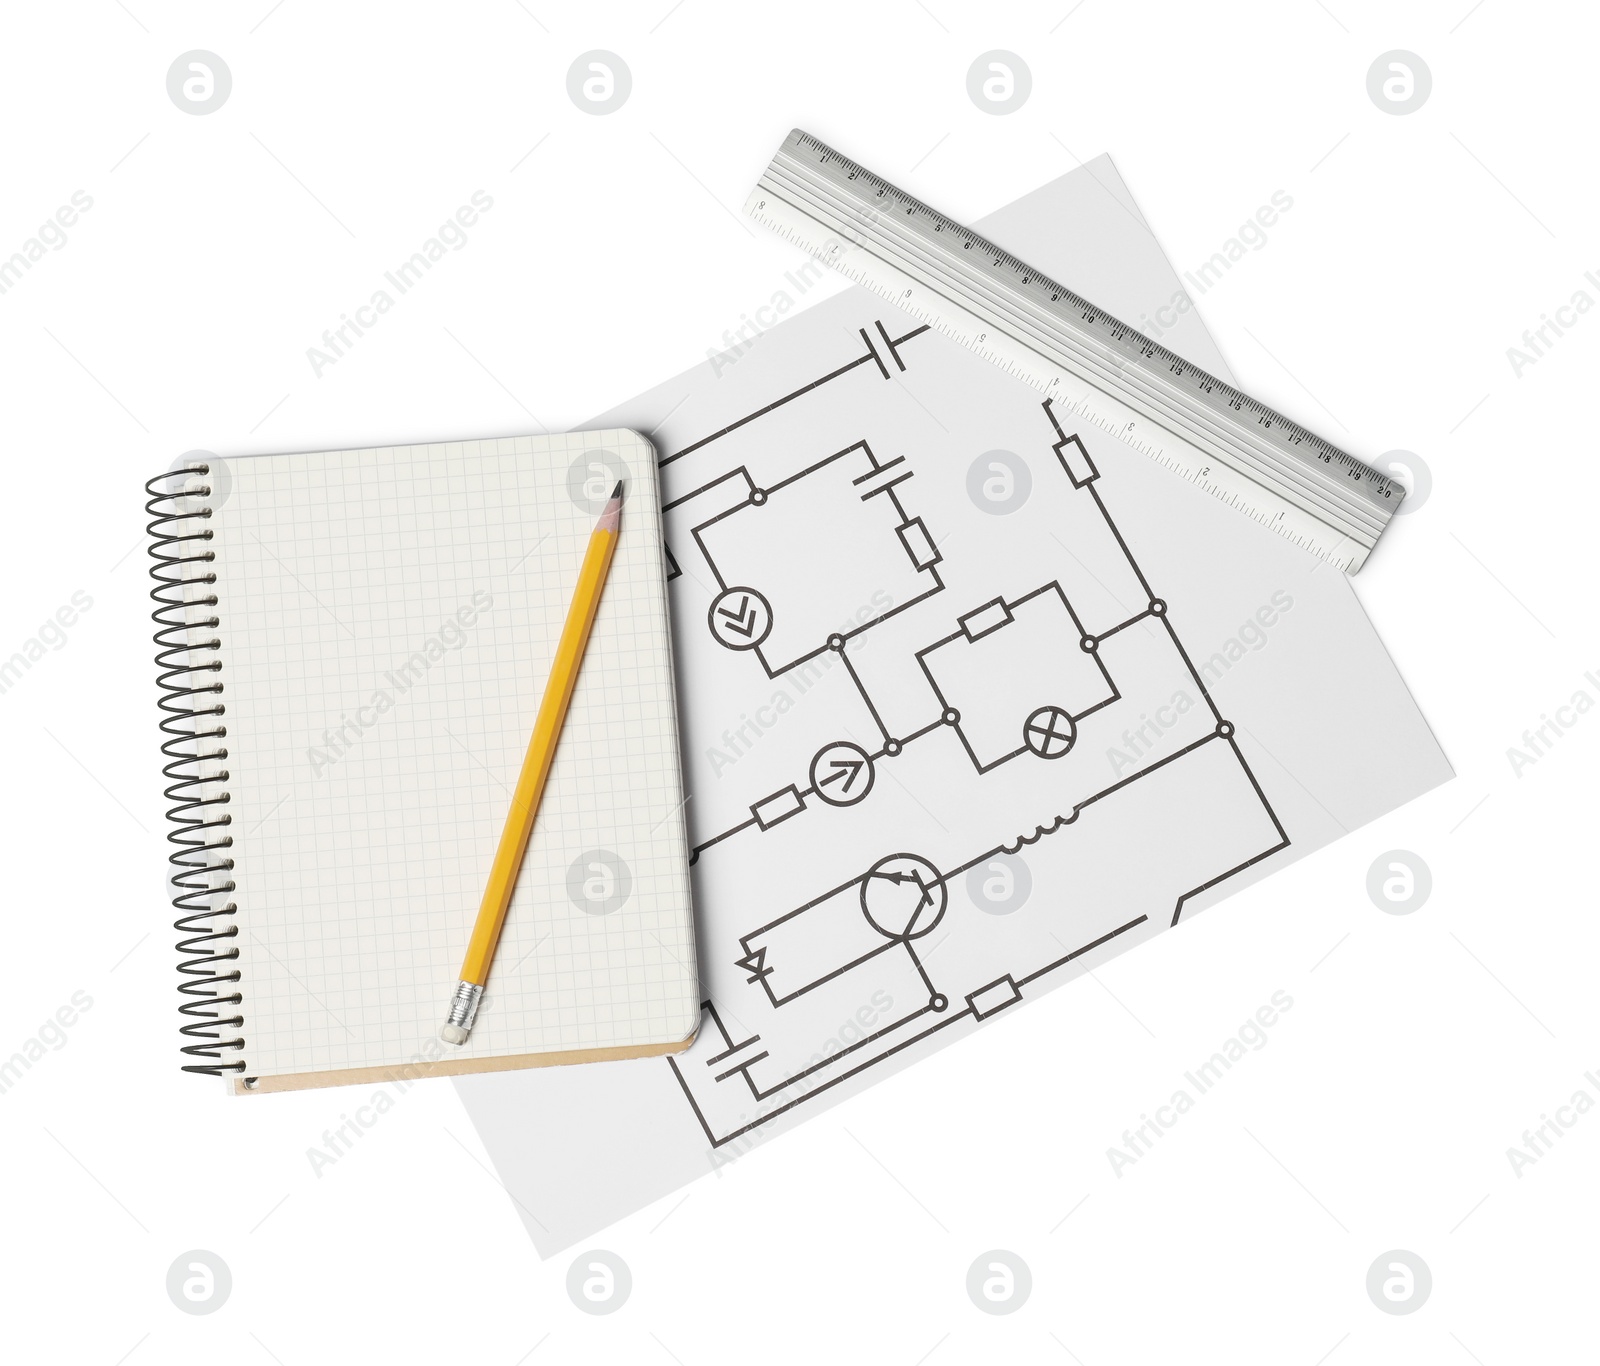 Photo of Wiring diagram, ruler and notepad isolated on white, top view